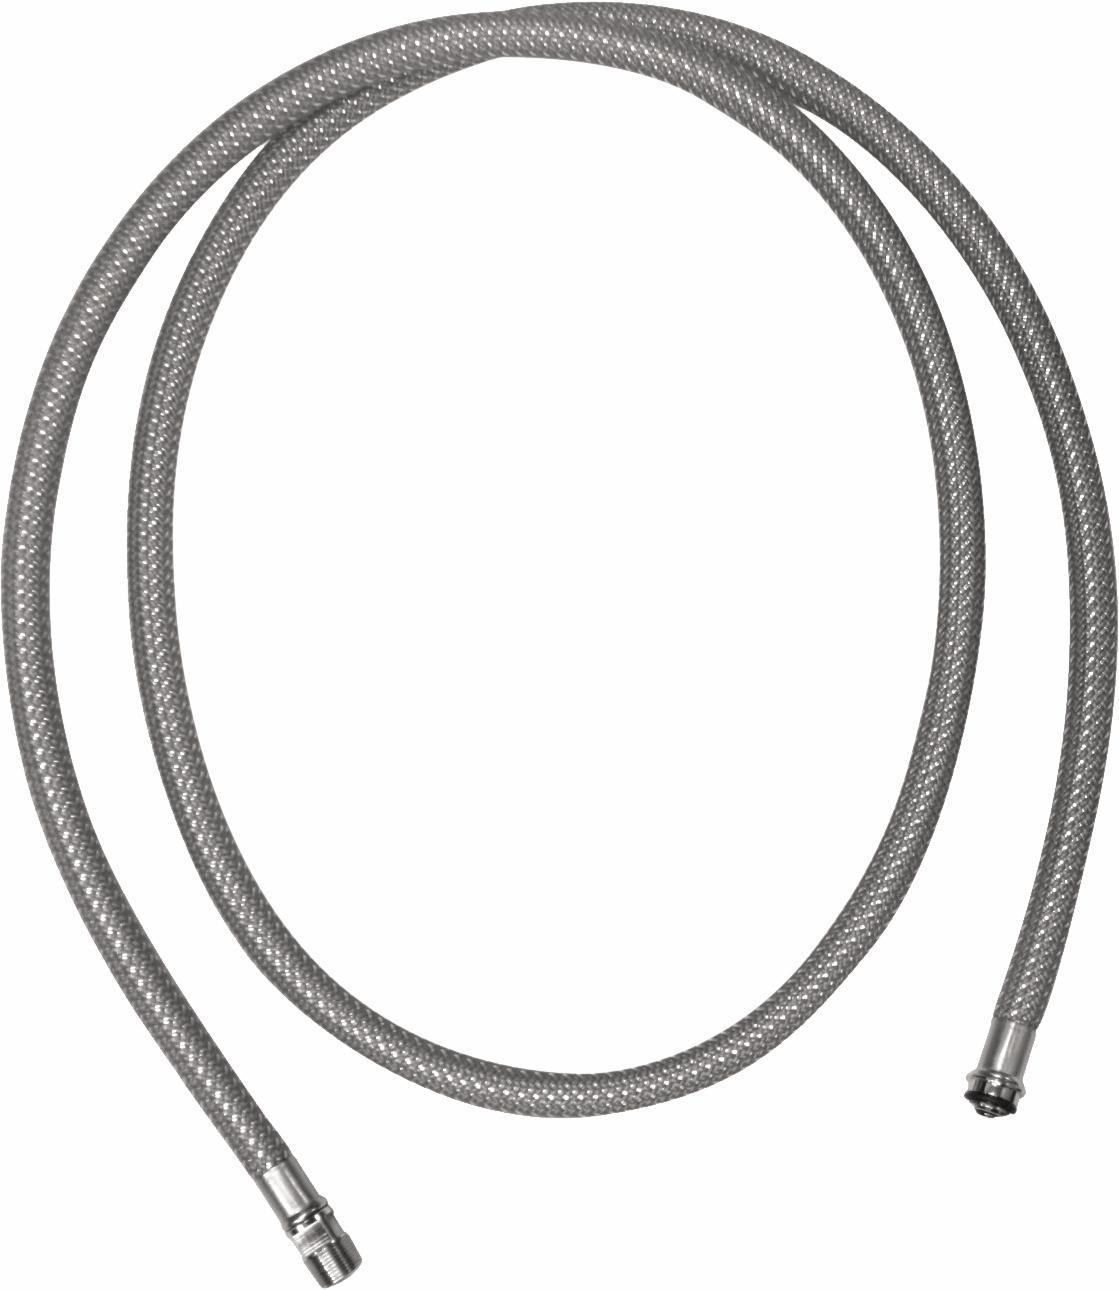 Hansgrohe Pull Down Kitchen Faucet Hose